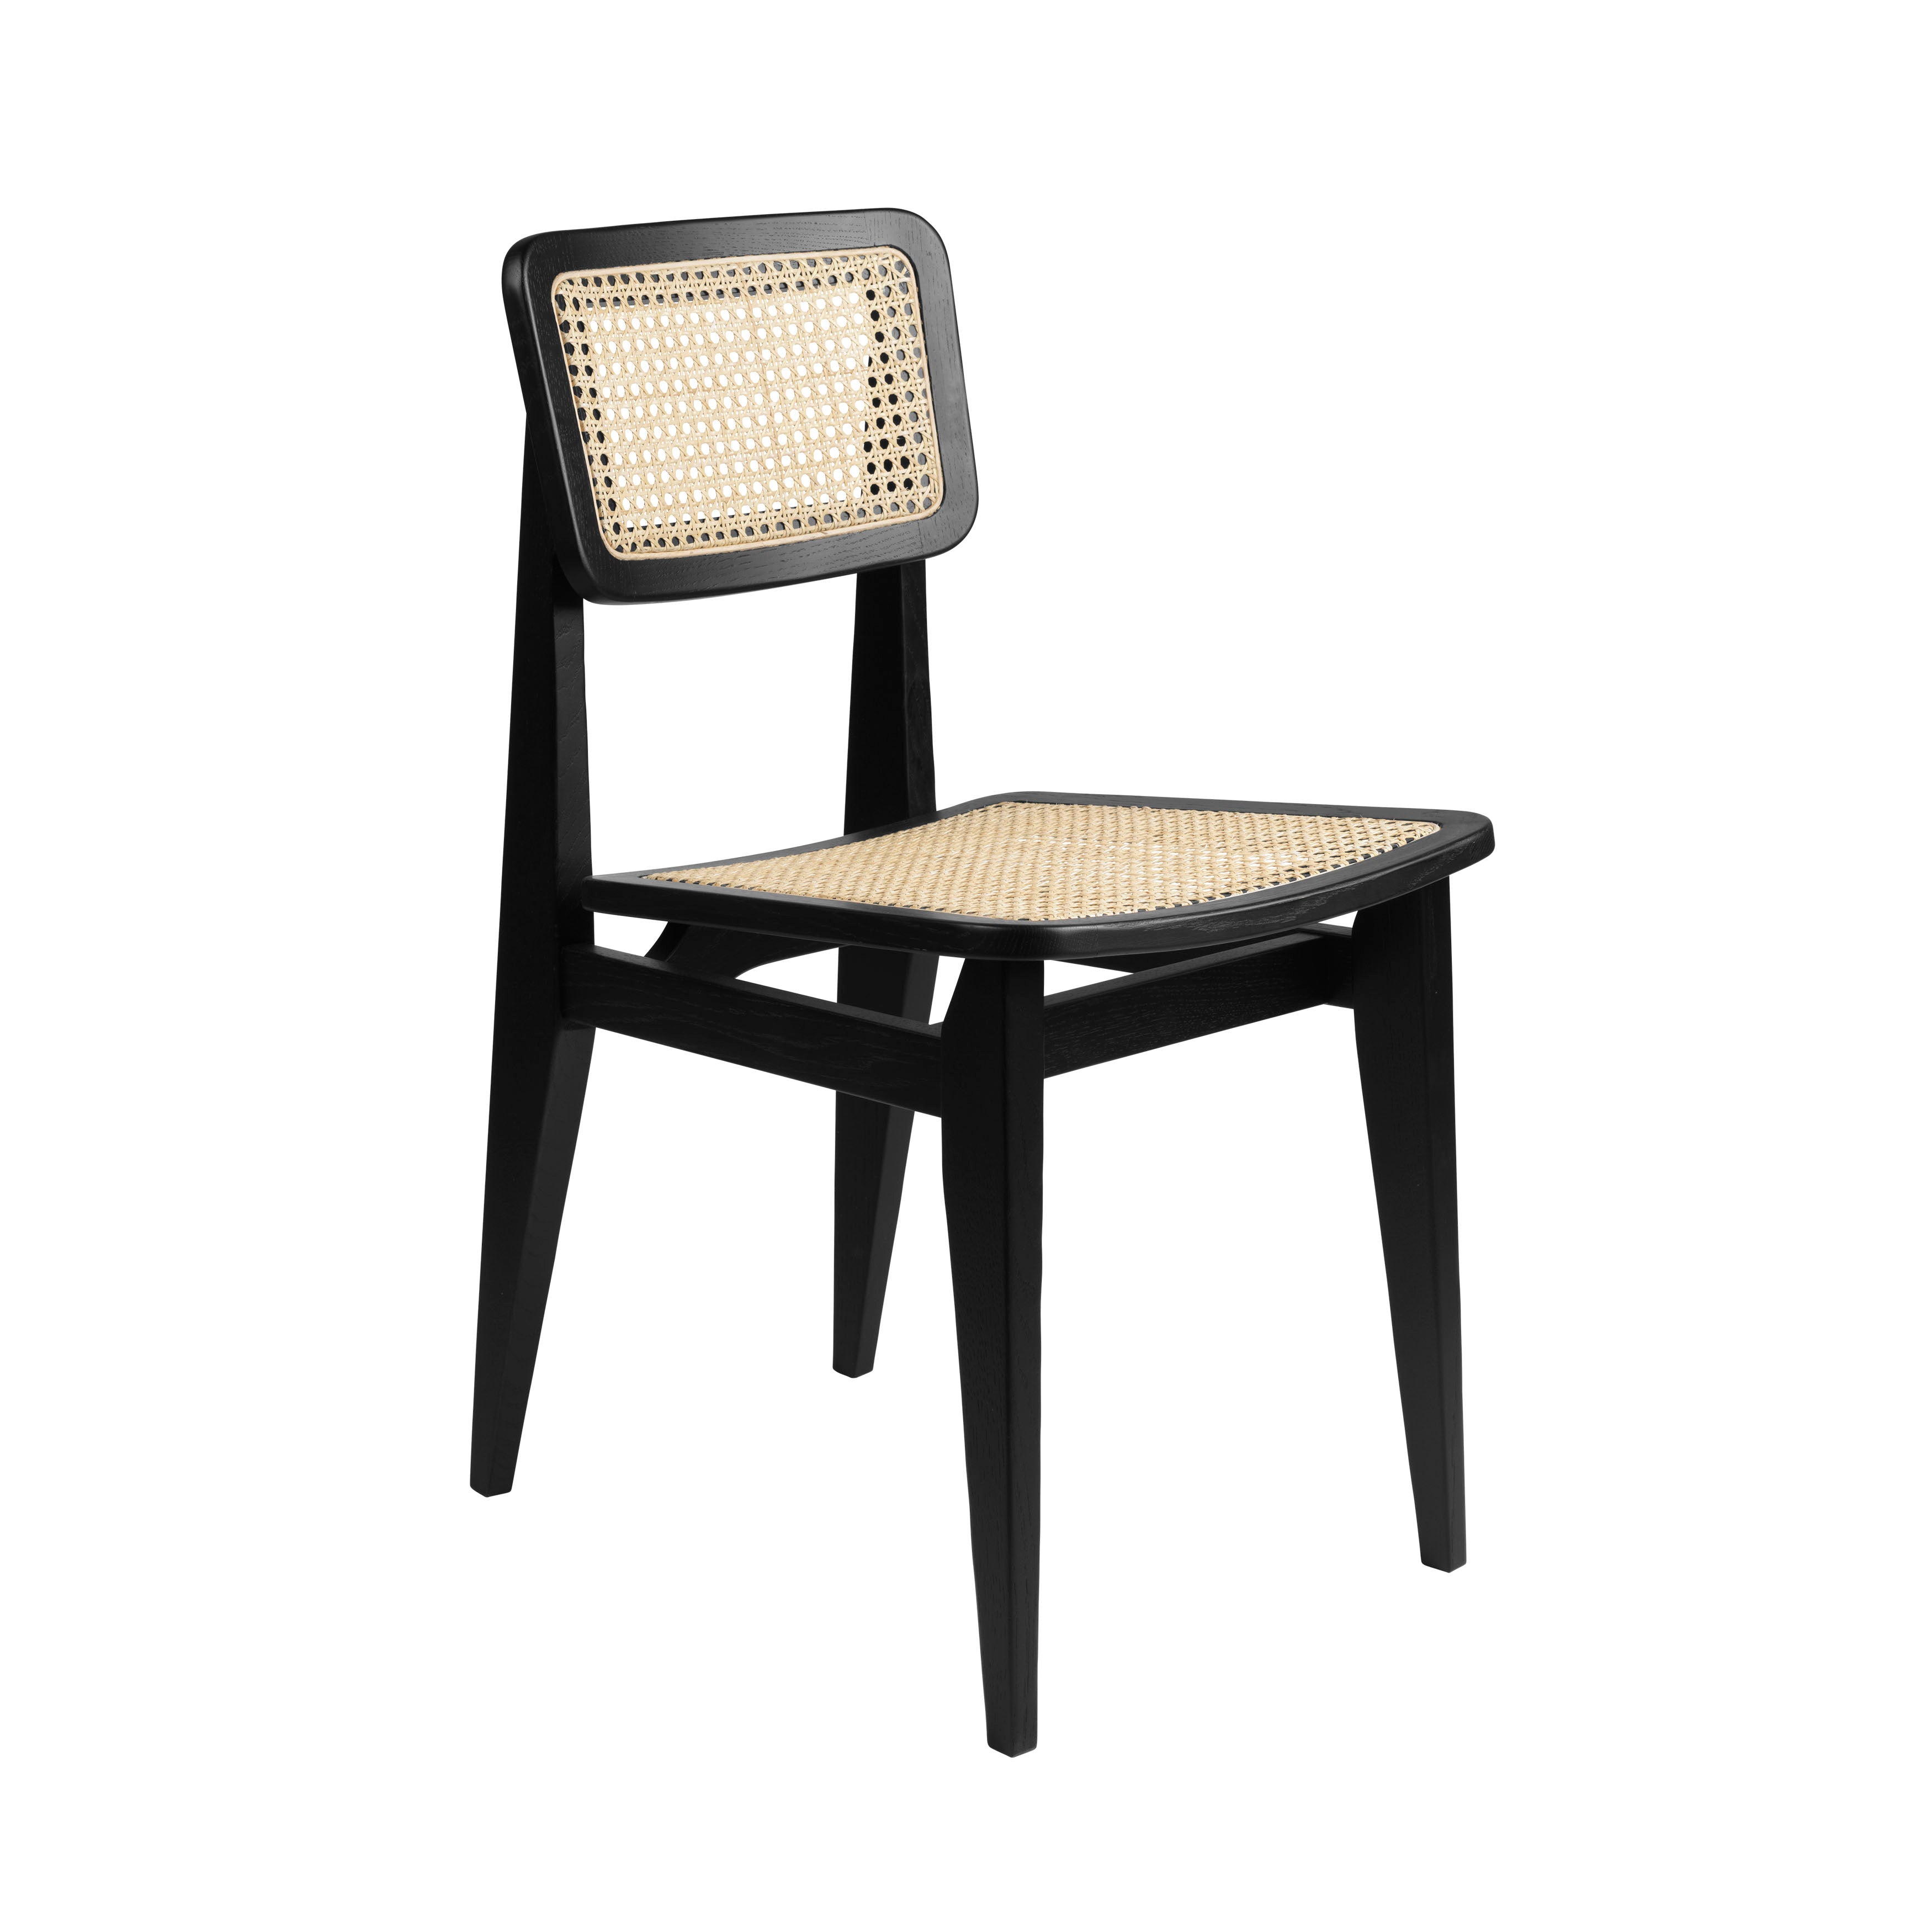 C-Chair Dining Chair: All French Cane + Black Stained Oak